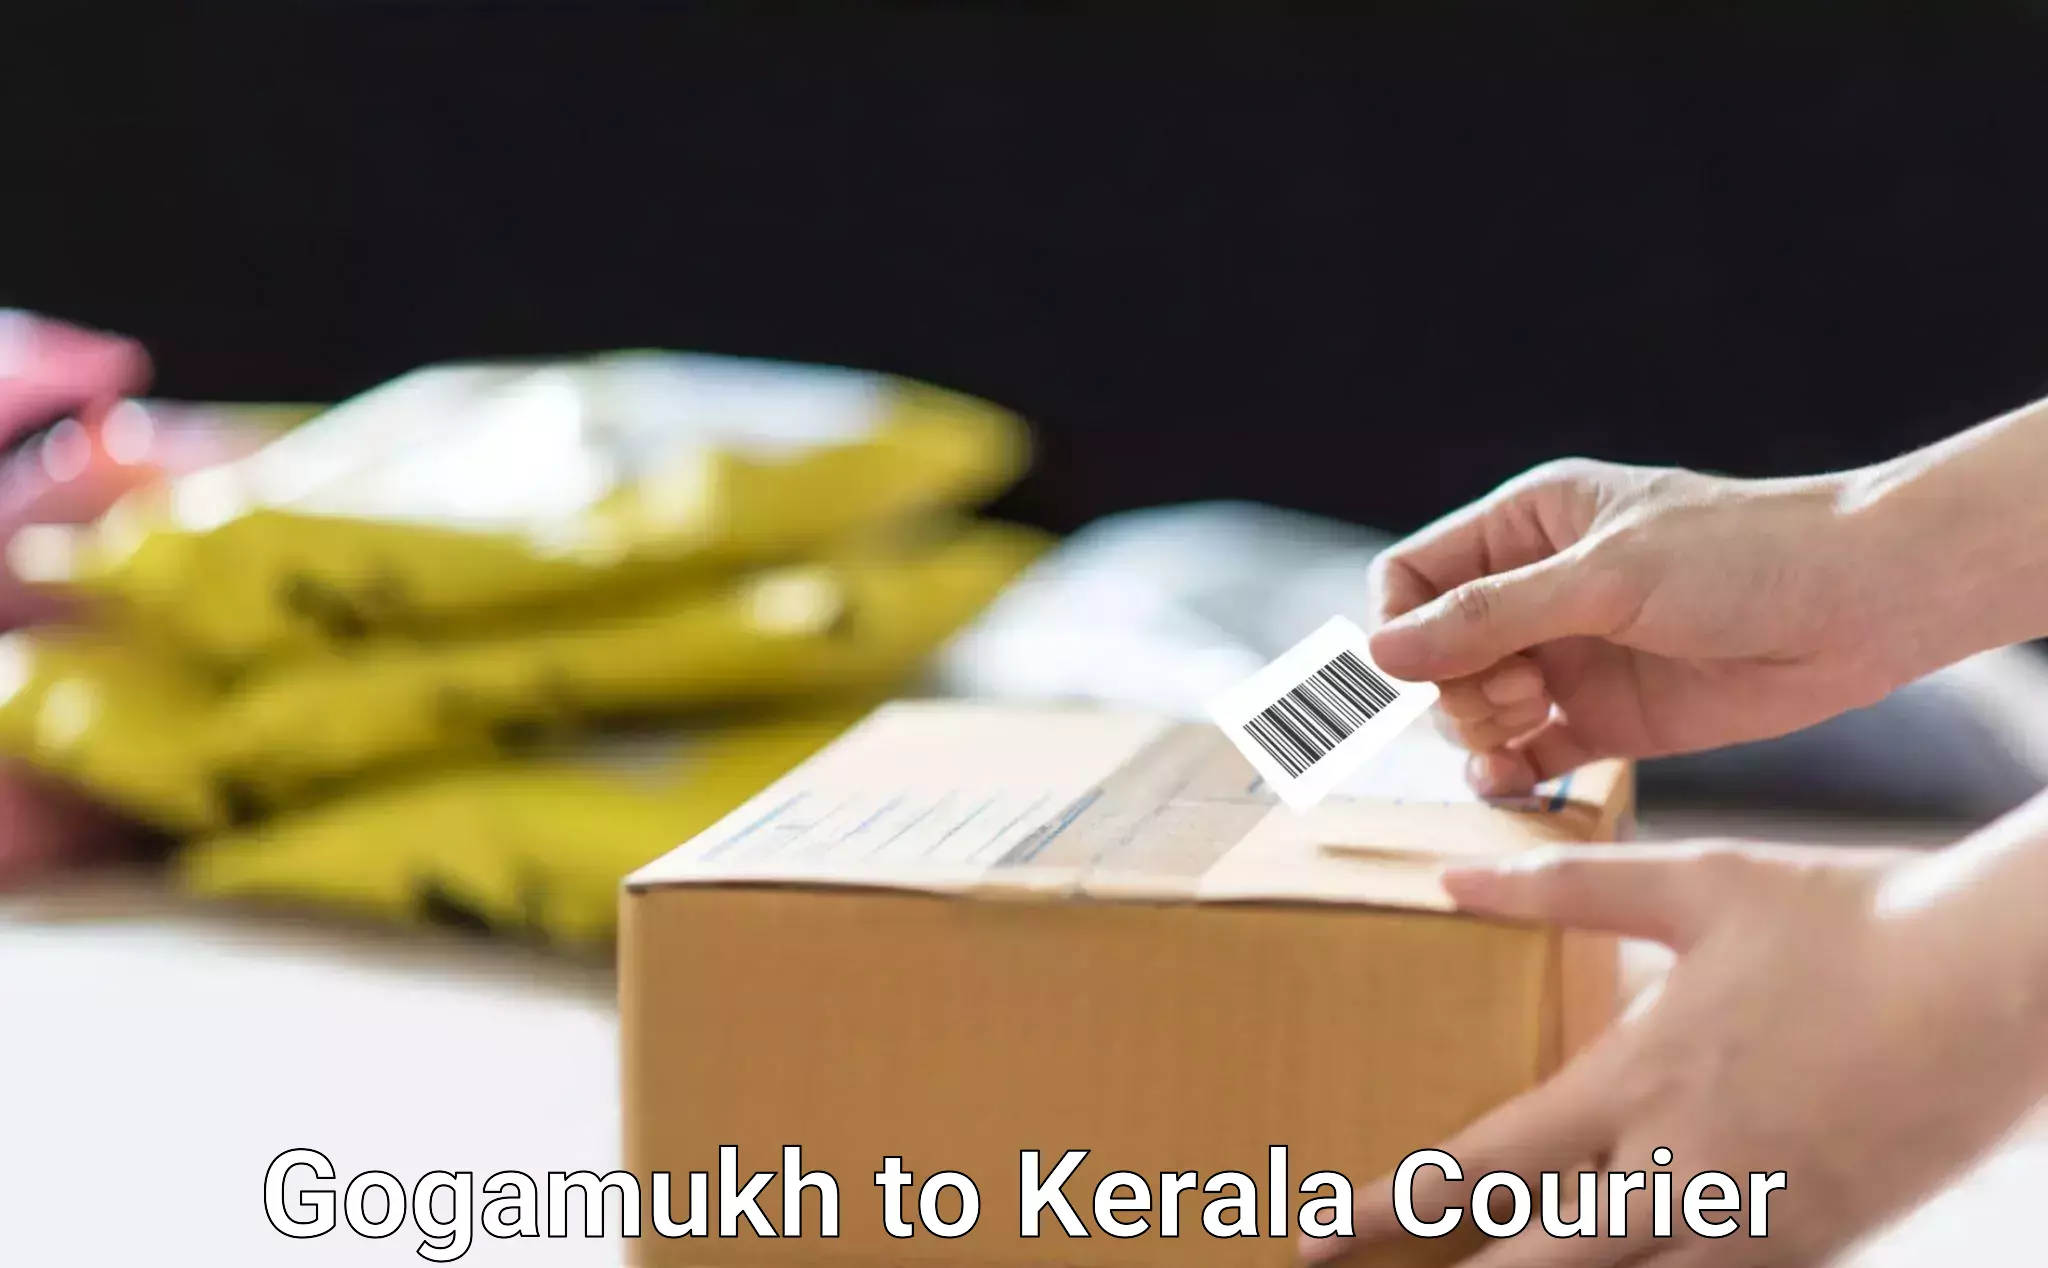 User-friendly delivery service Gogamukh to Alappuzha